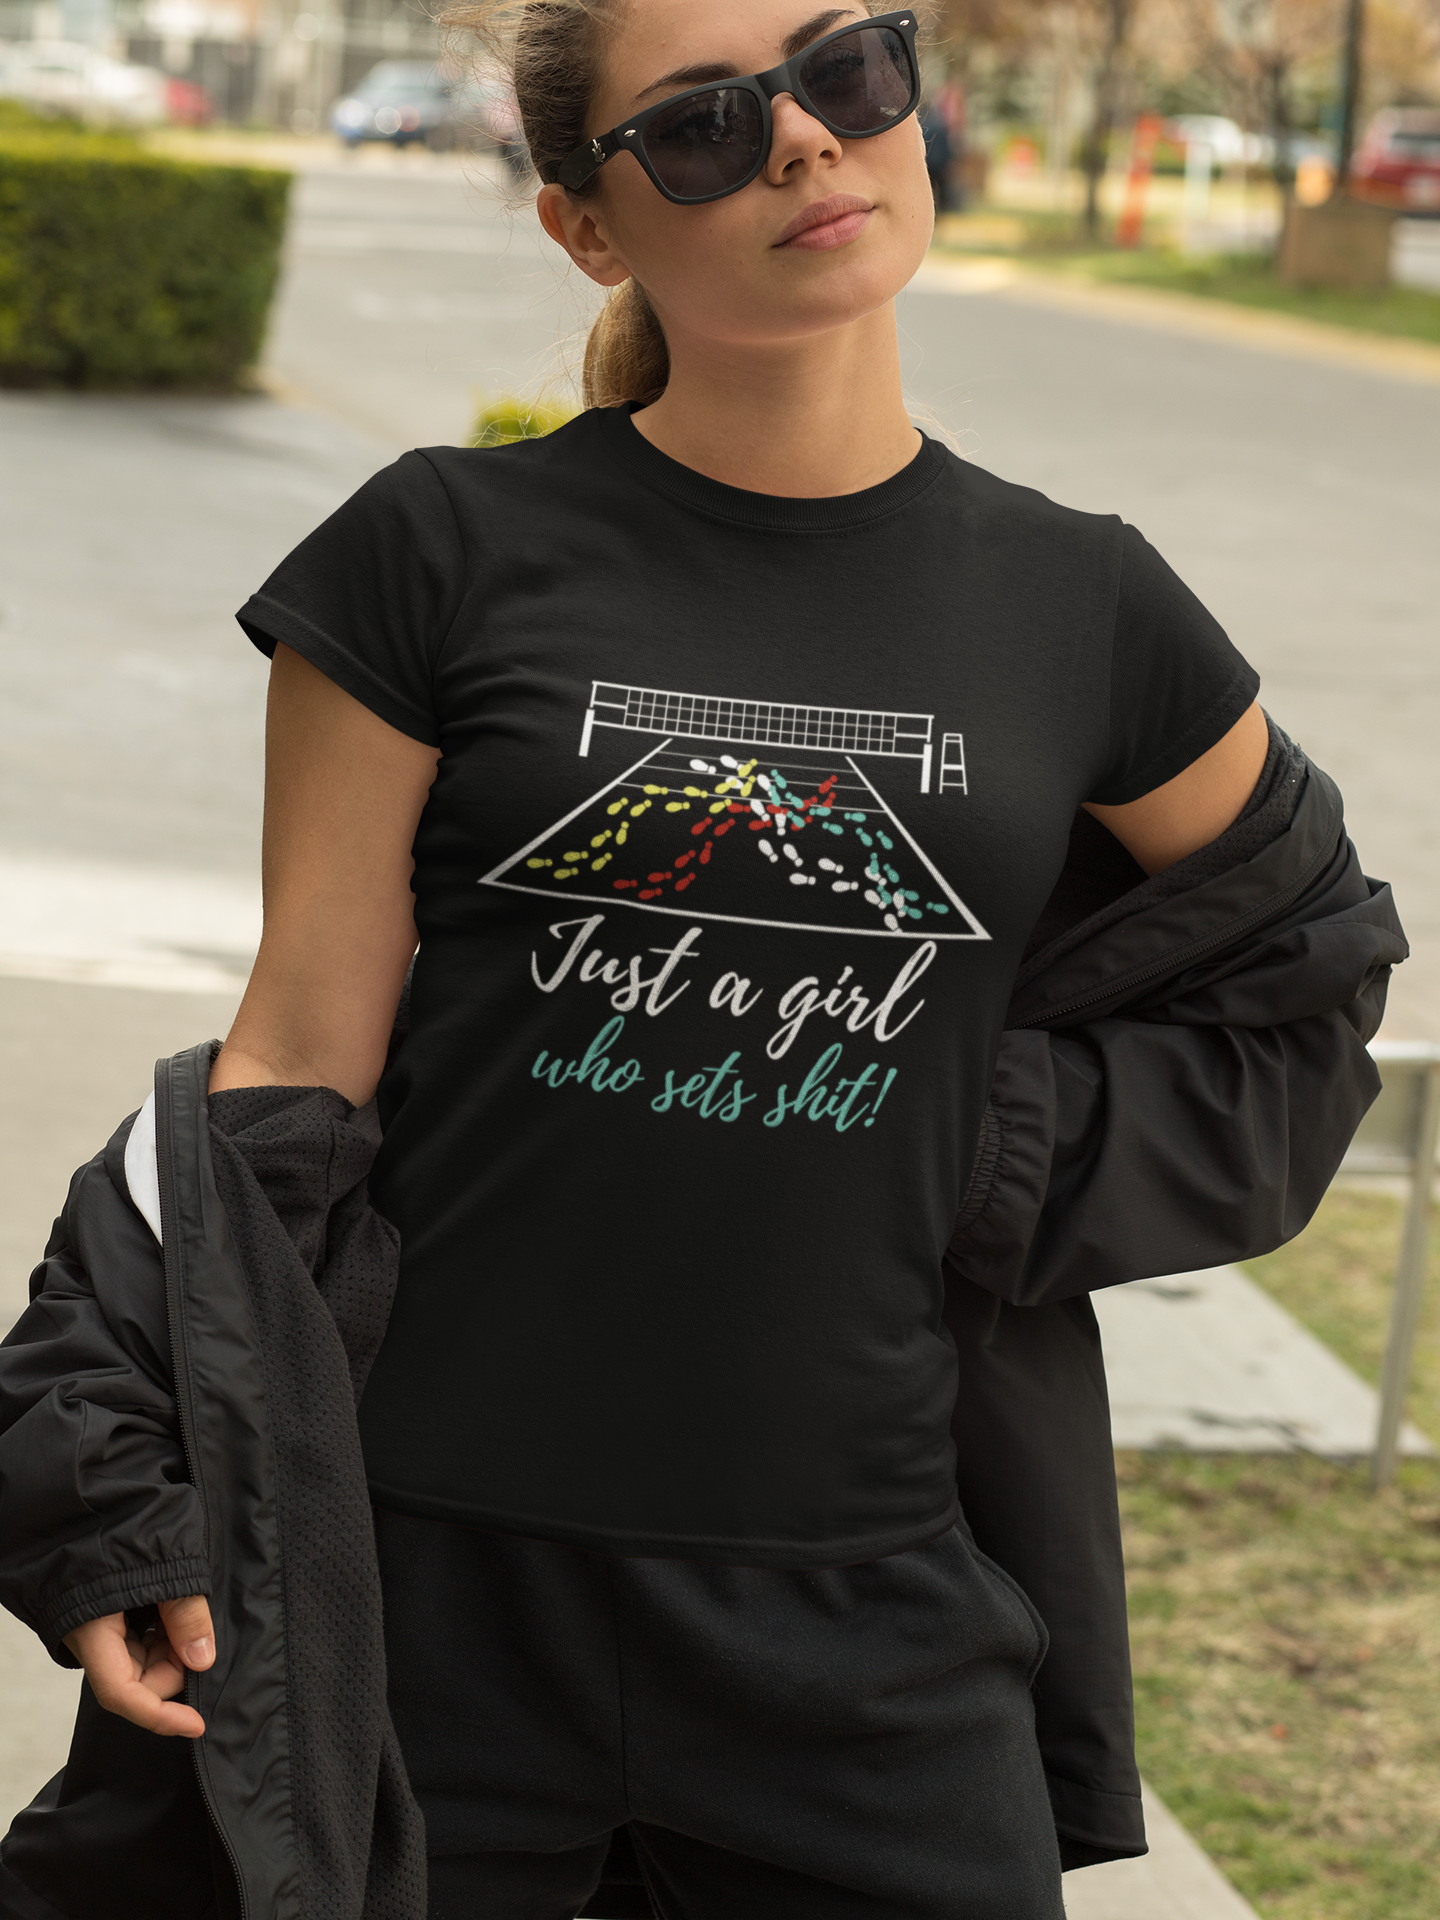 Just A Girl Who Sets Shit! Volleyball Setter Shirts, Hoodies and Sweatshirts That Make Great Gifts For Volleyball Players.